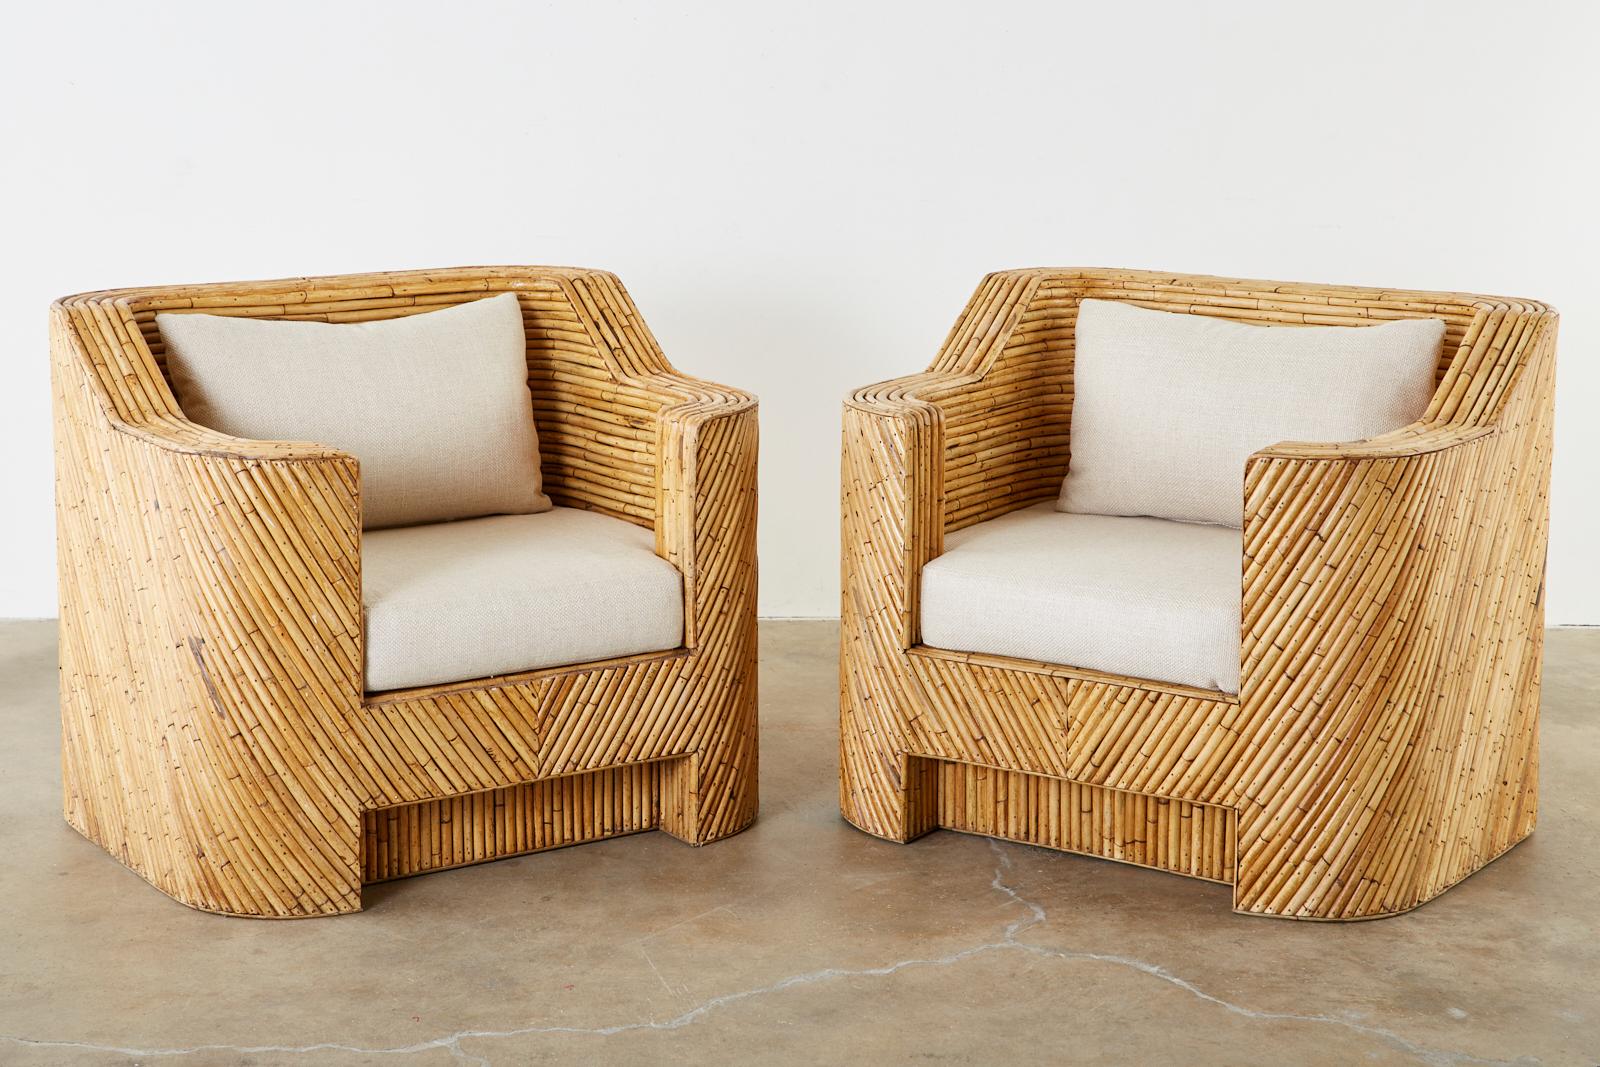 Hand-Crafted Pair of Organic Modern Bamboo Rattan Lounge Chairs and Ottoman